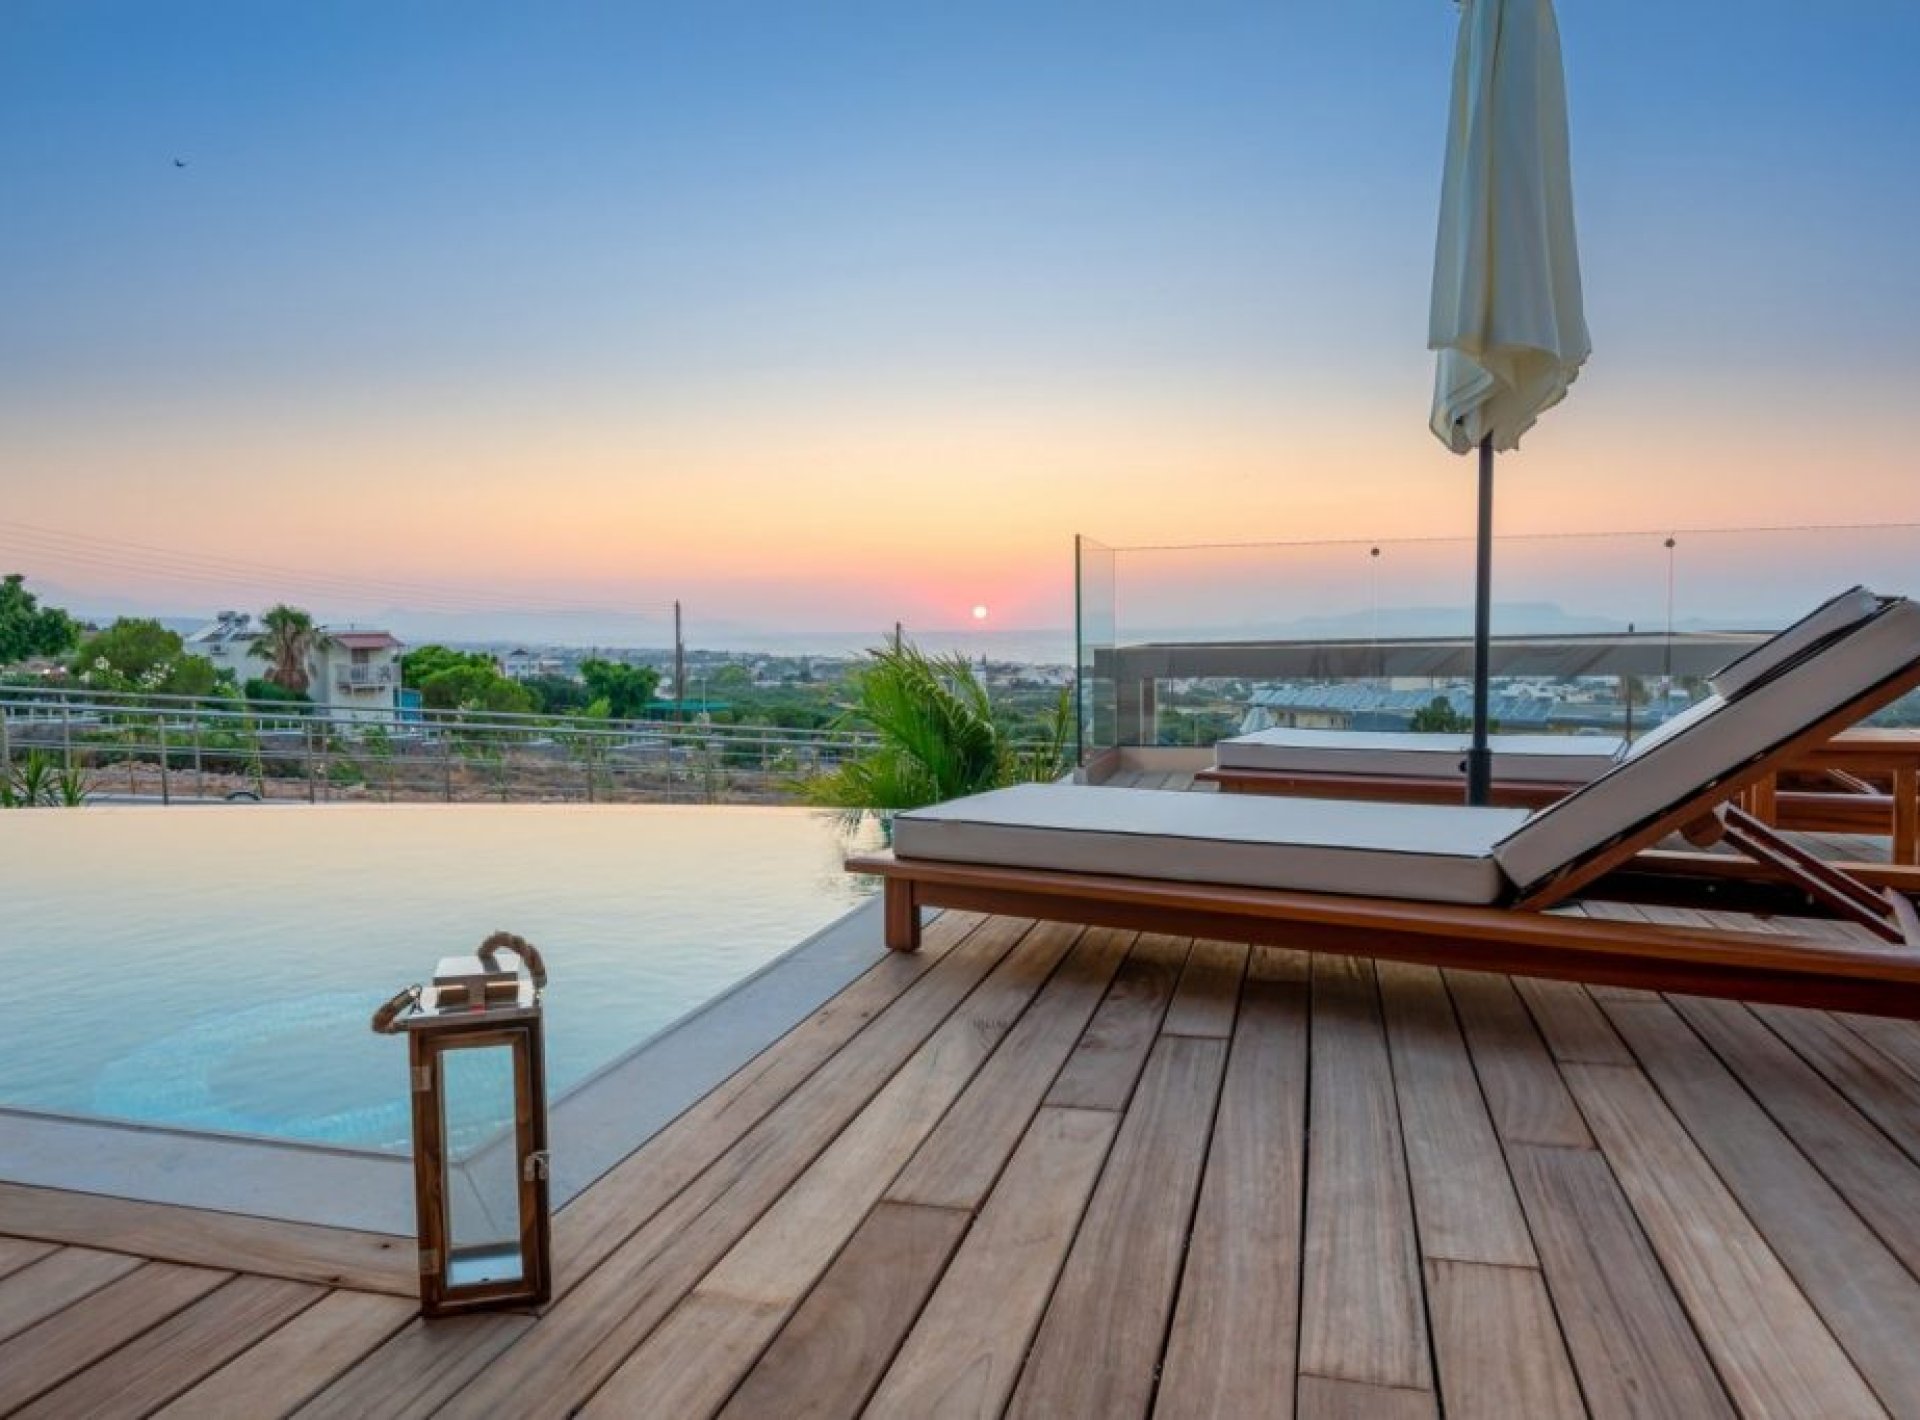 ISholidays Delight - 2 Bedrooms Sea View Villa with Private Pool